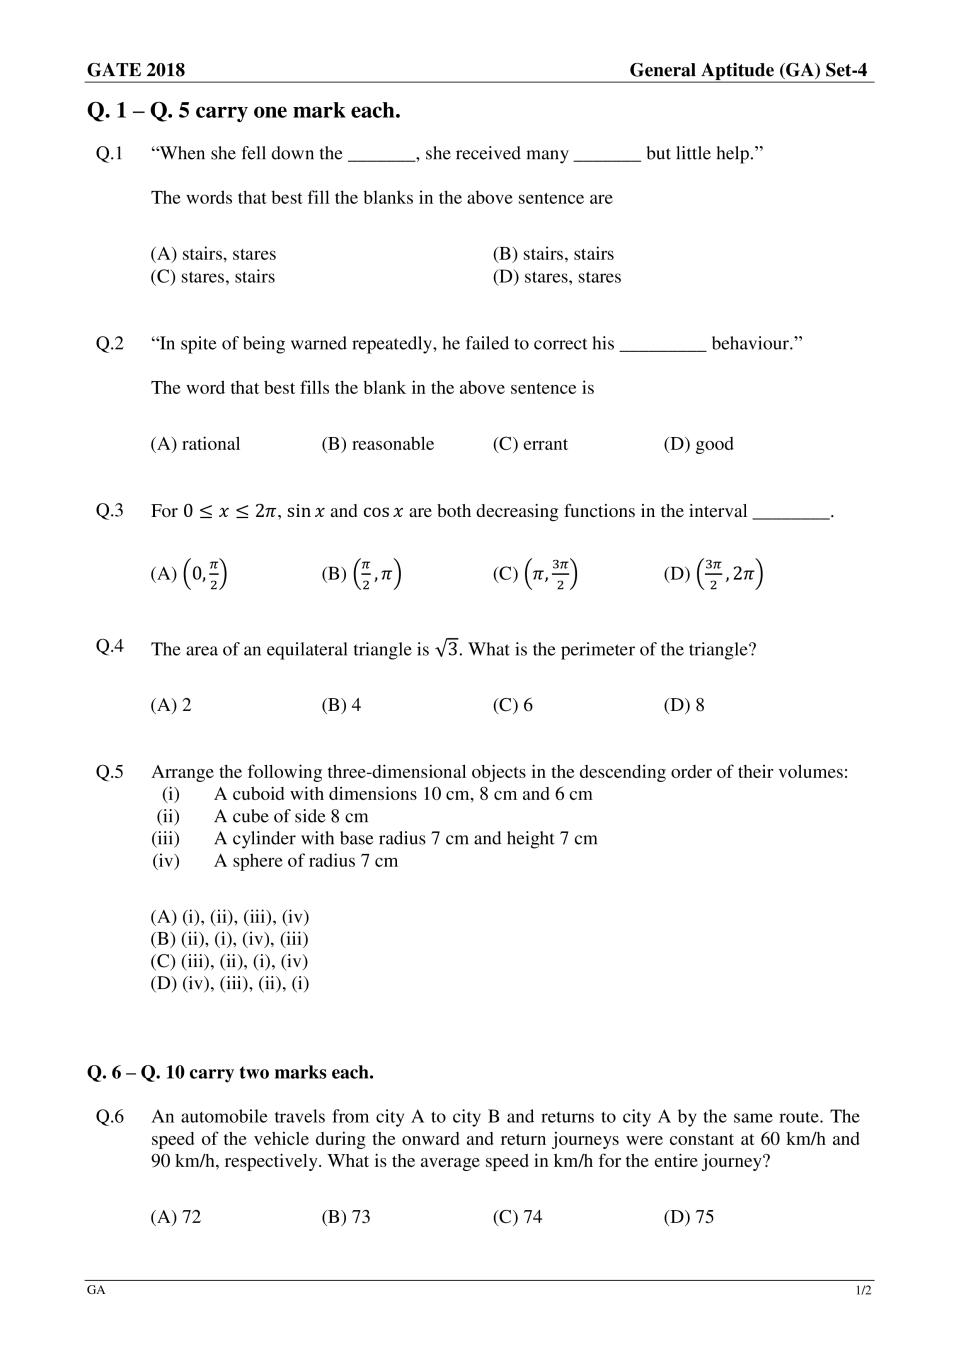 GATE 2018 Physics (PH) Question Paper with Answer - Page 1